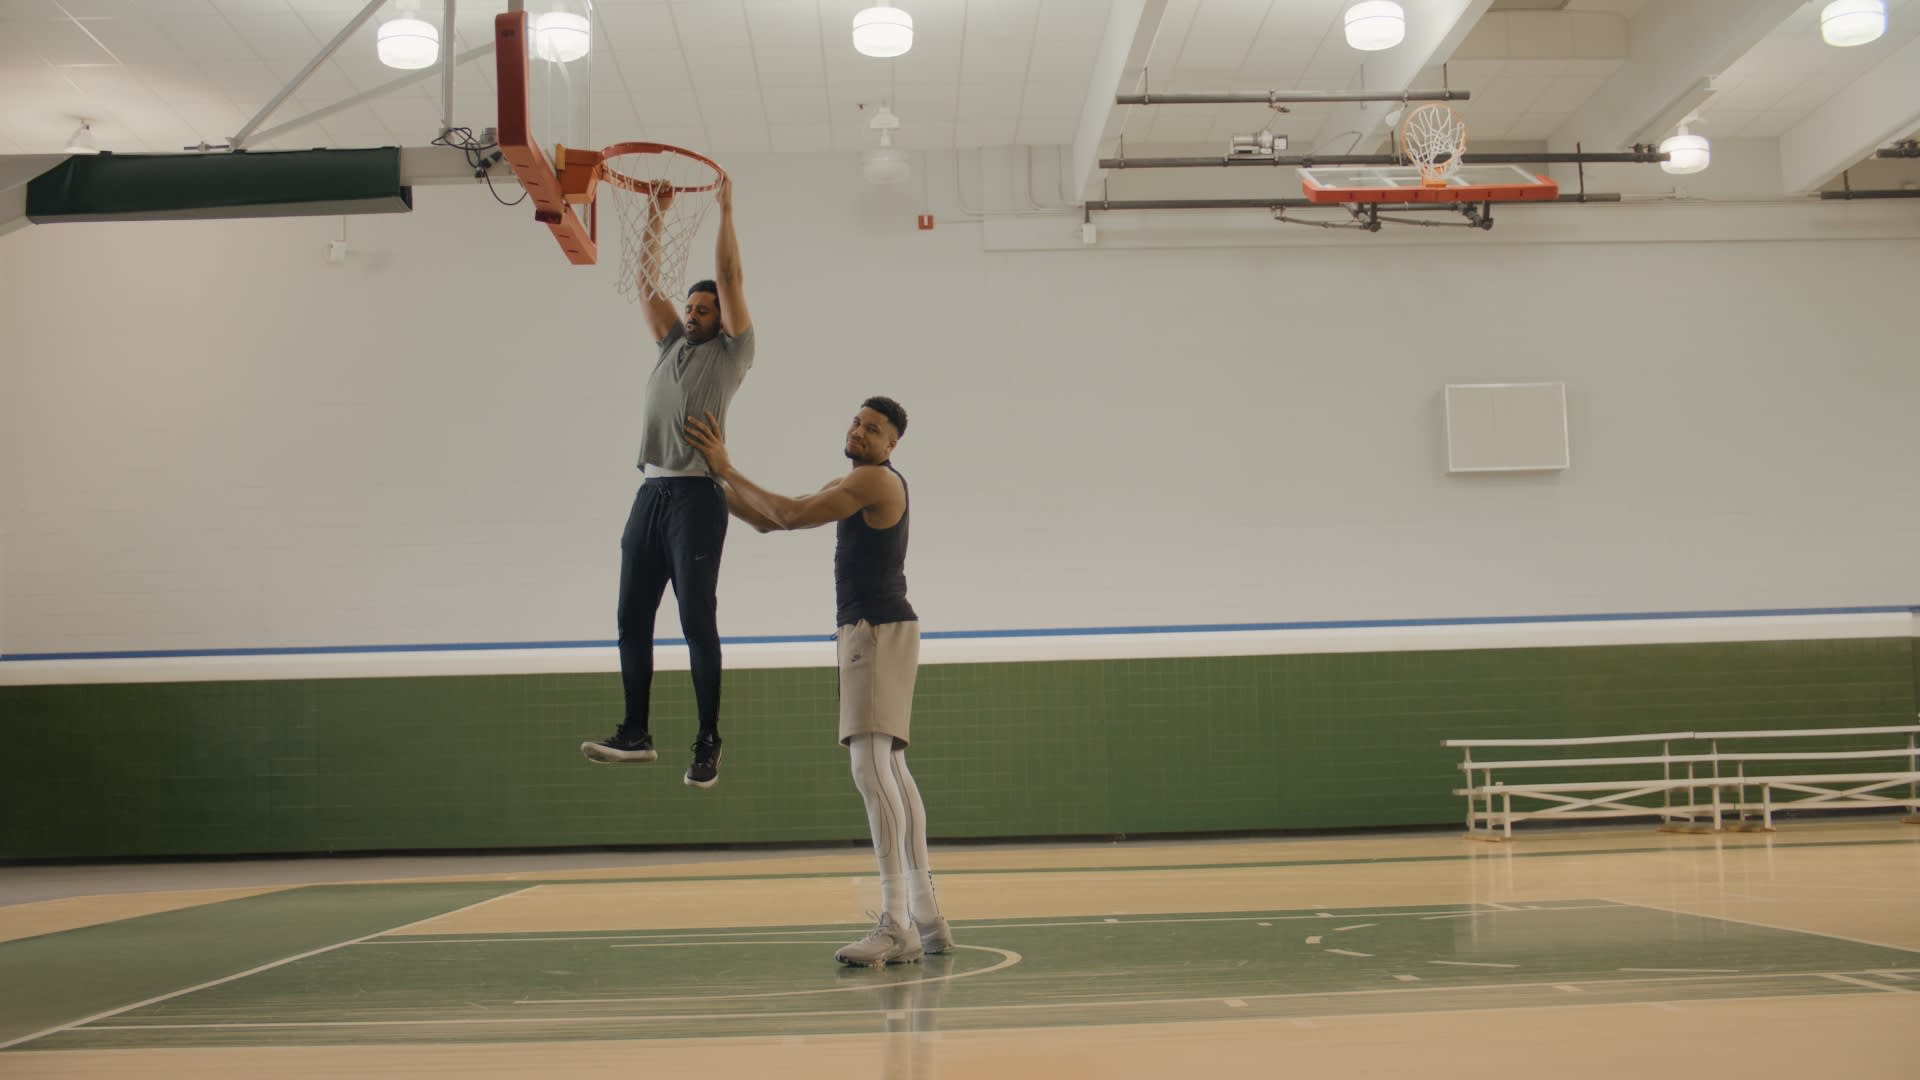 Hasan Minhaj dunking with some help from Giannis Antetokounmpo in WhatsApp ad